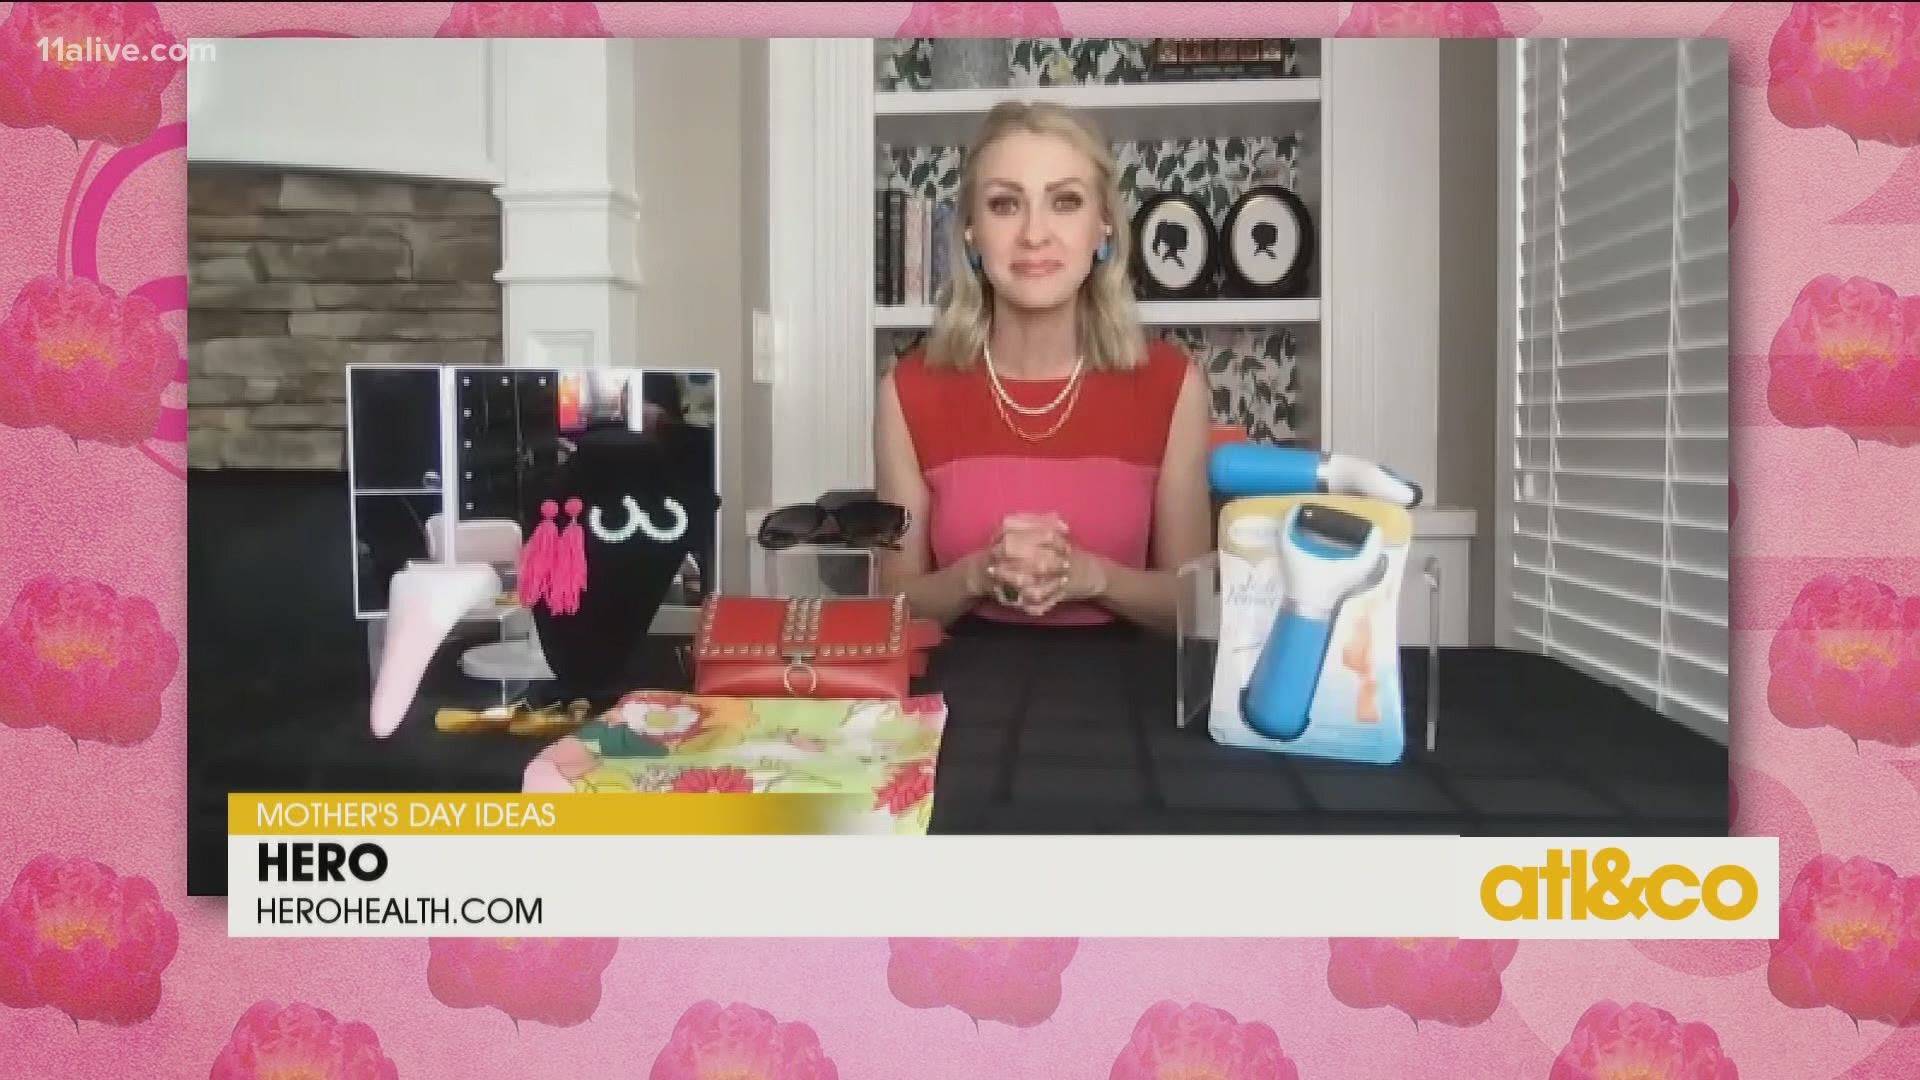 Lifestyle expert Emily Foley shares great Mother's Day gift ideas from top brands.